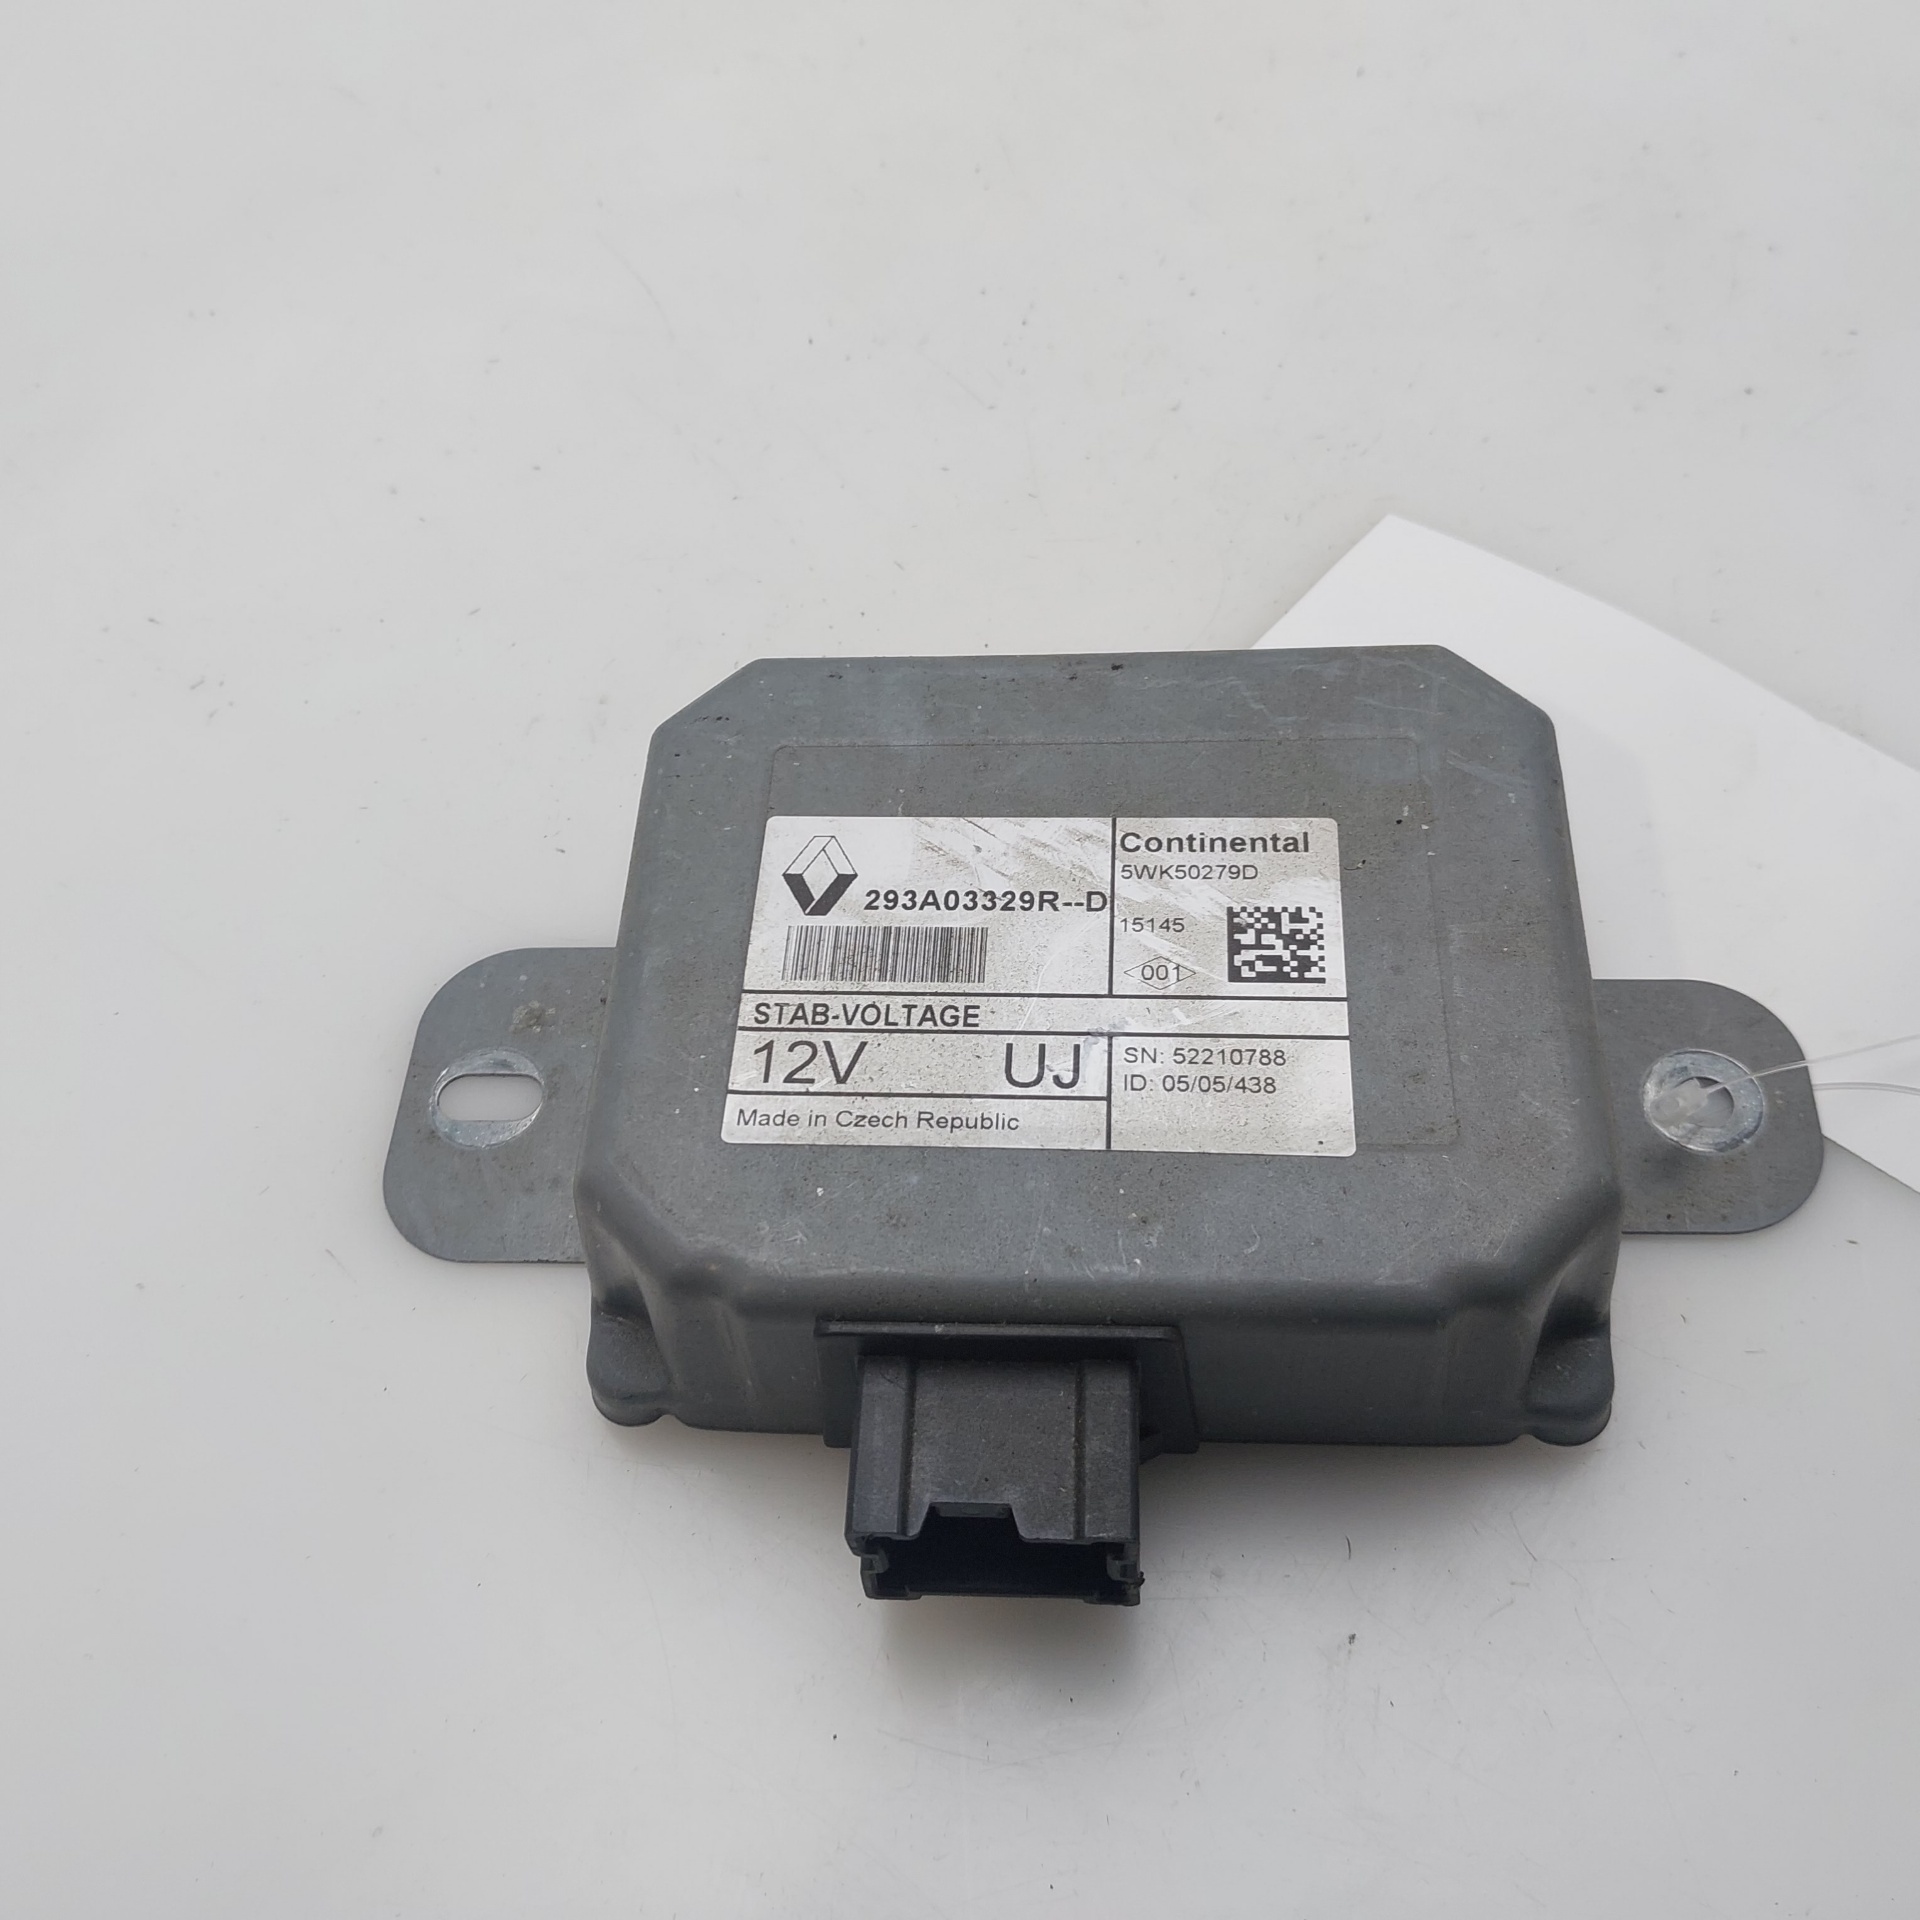 RENAULT Megane 3 generation (2008-2020) Other Control Units 293A03329R 25124362